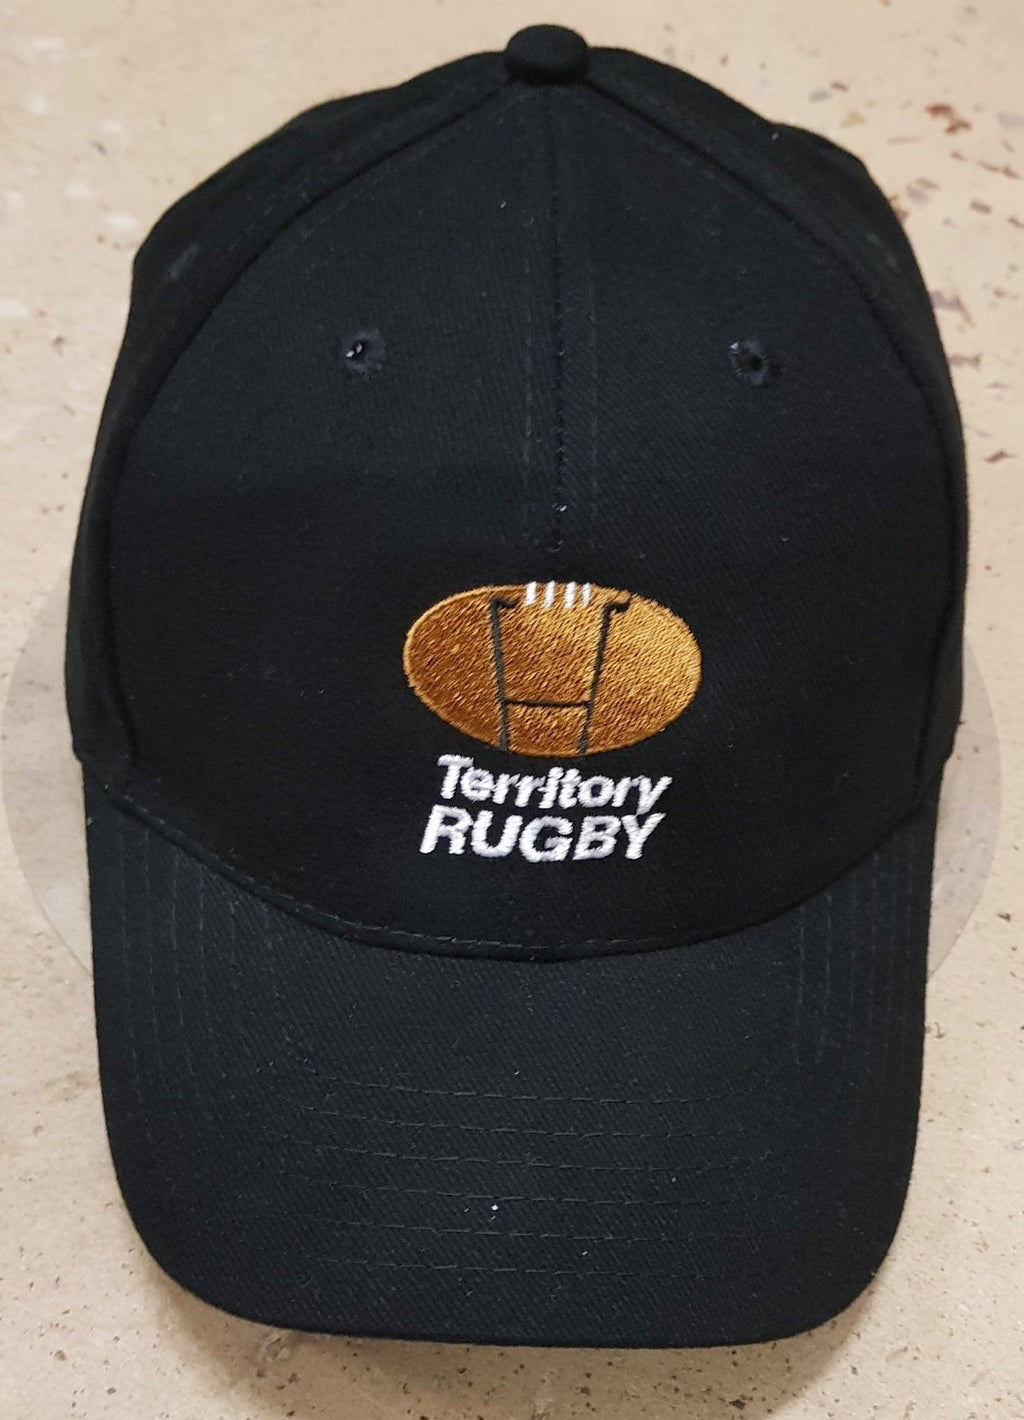 Territory Rugby Cap - The Rugby Shop Darwin